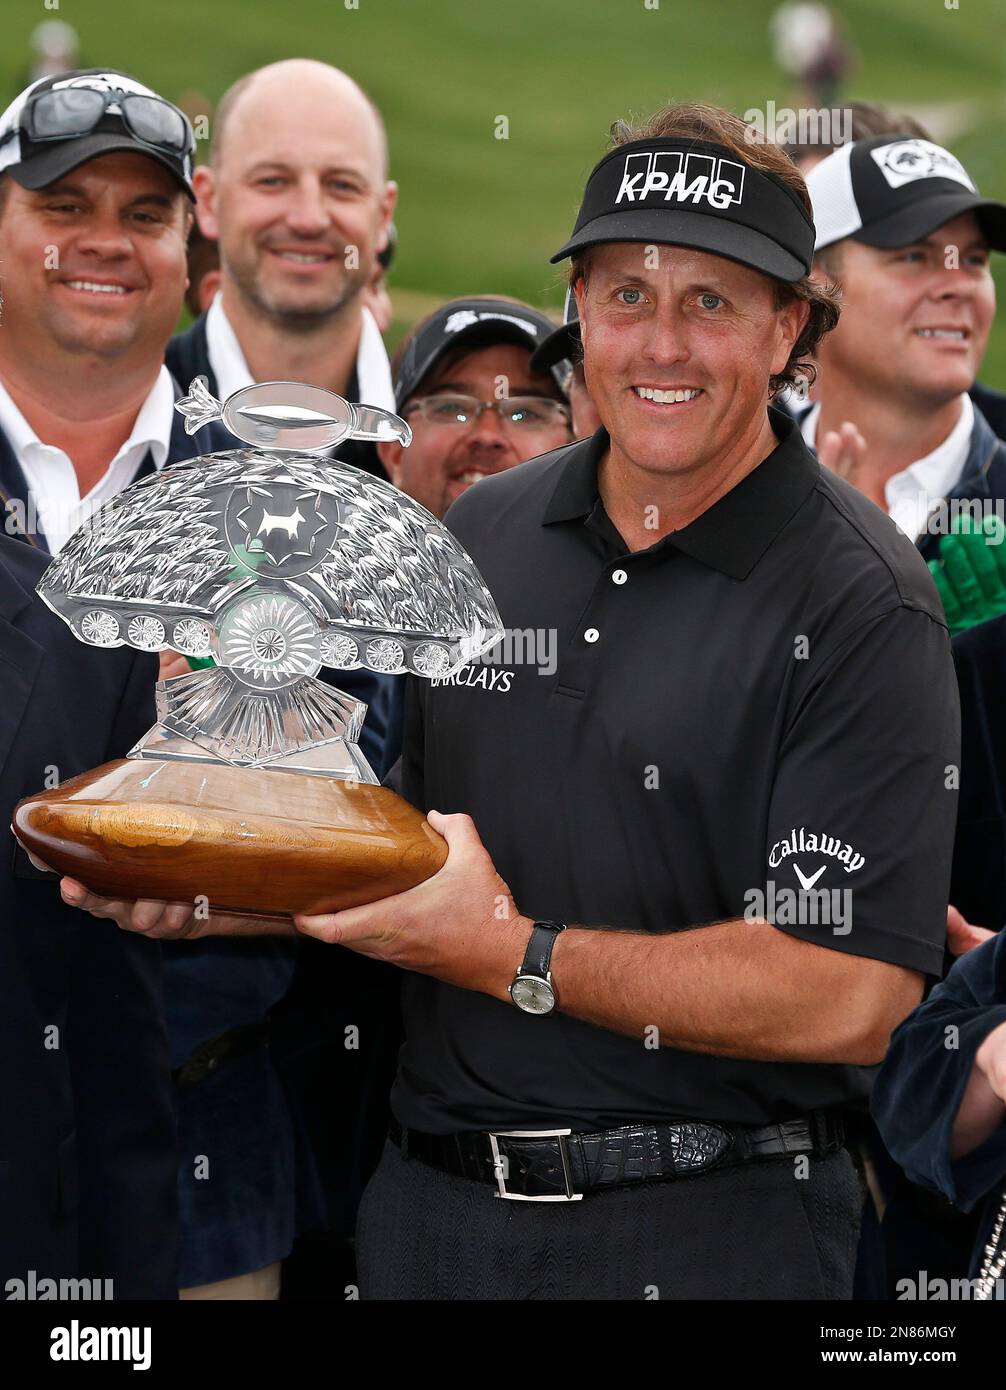 Phil Mickelson holds the championship trophy as he poses for photographers with the Phoenix Thunderbirds after winning the Waste Management Phoenix Open golf tournament on Sunday, Feb